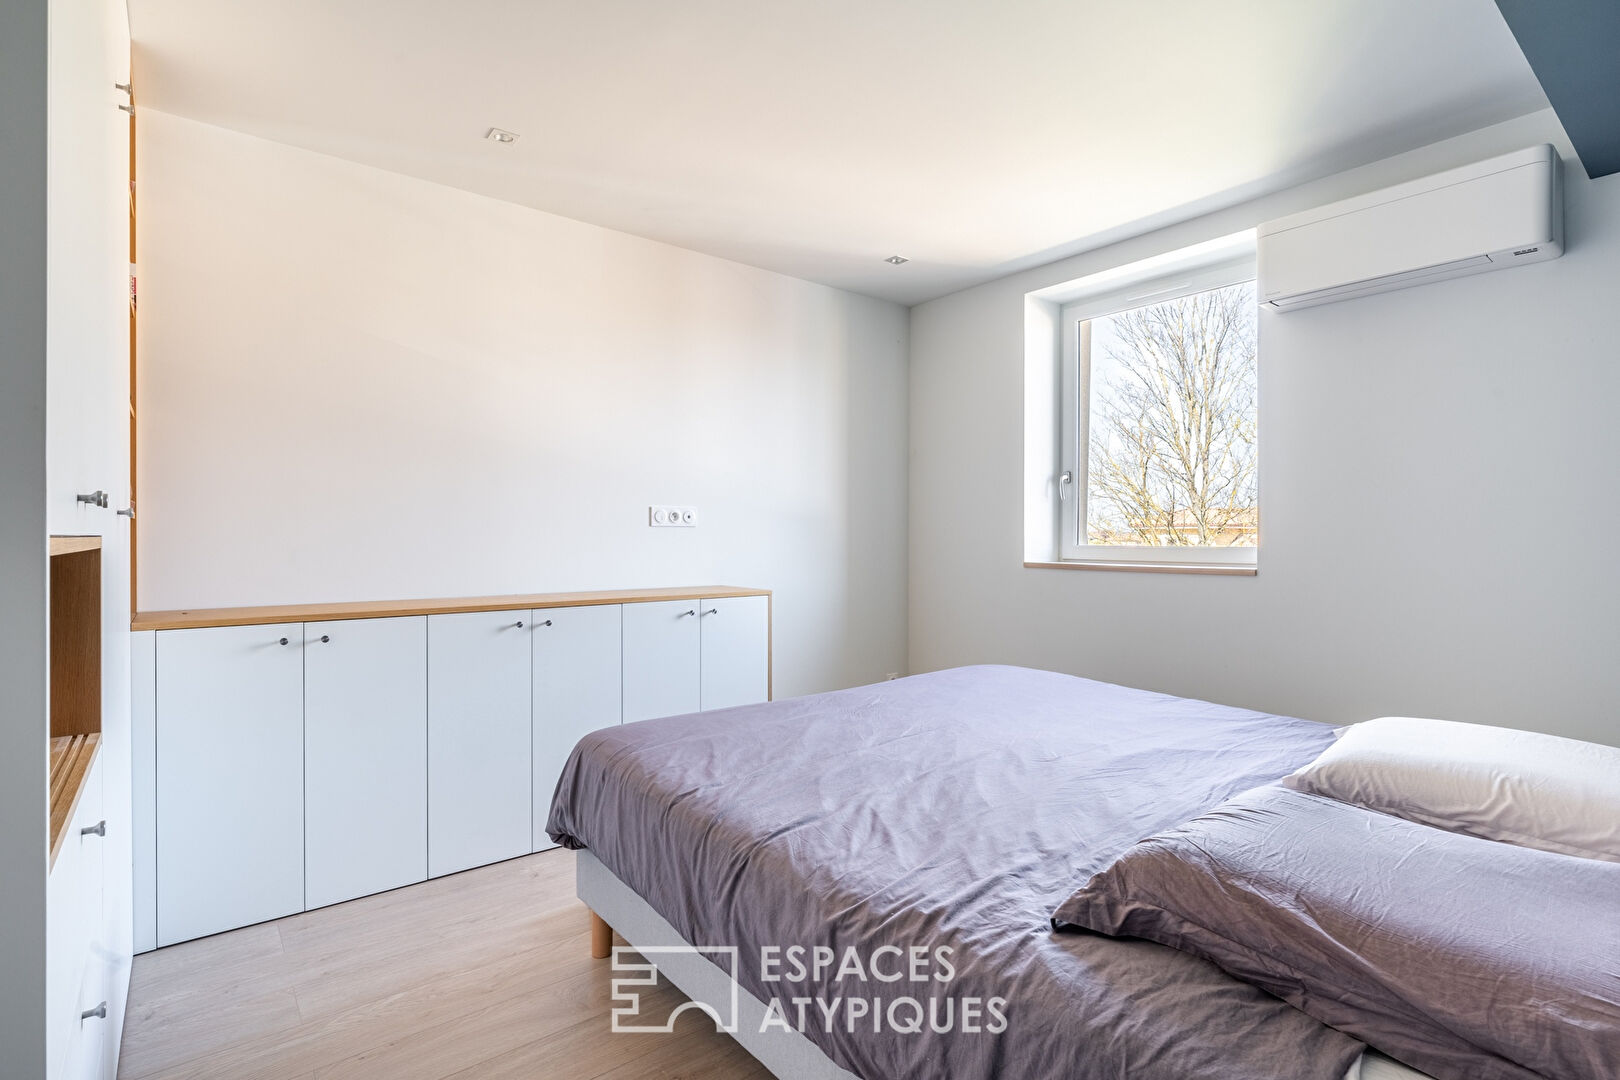 Completely renovated triplex house in Massieux